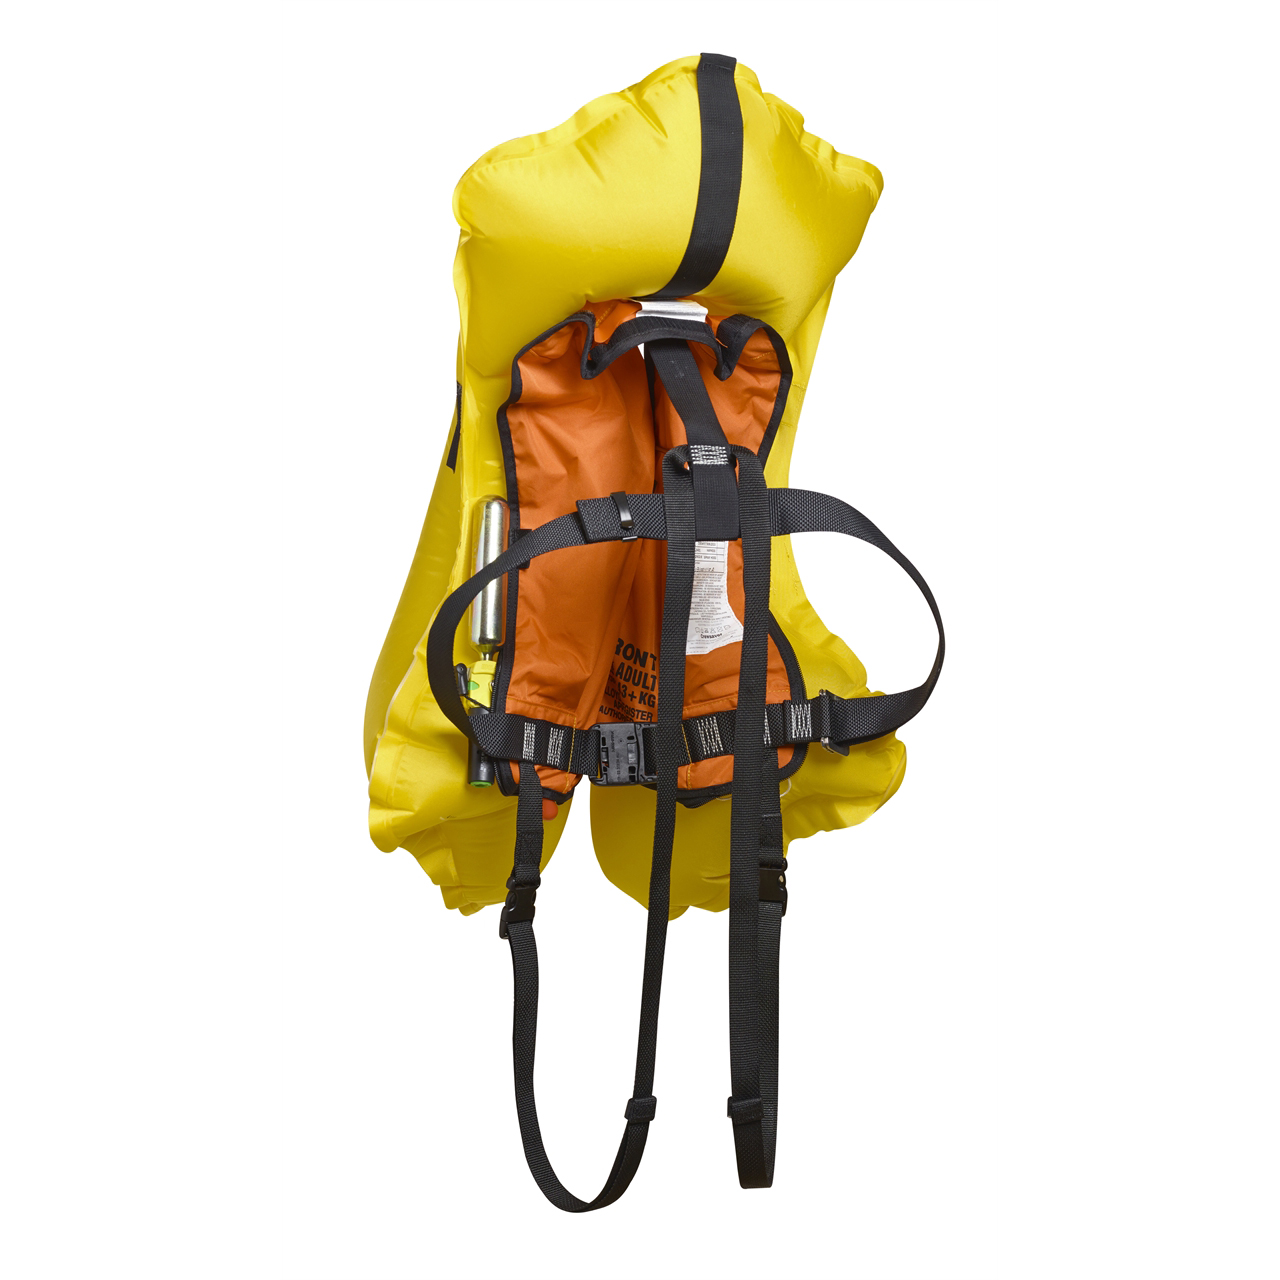 Crewfit 275N Non Harness Hammar with Hood